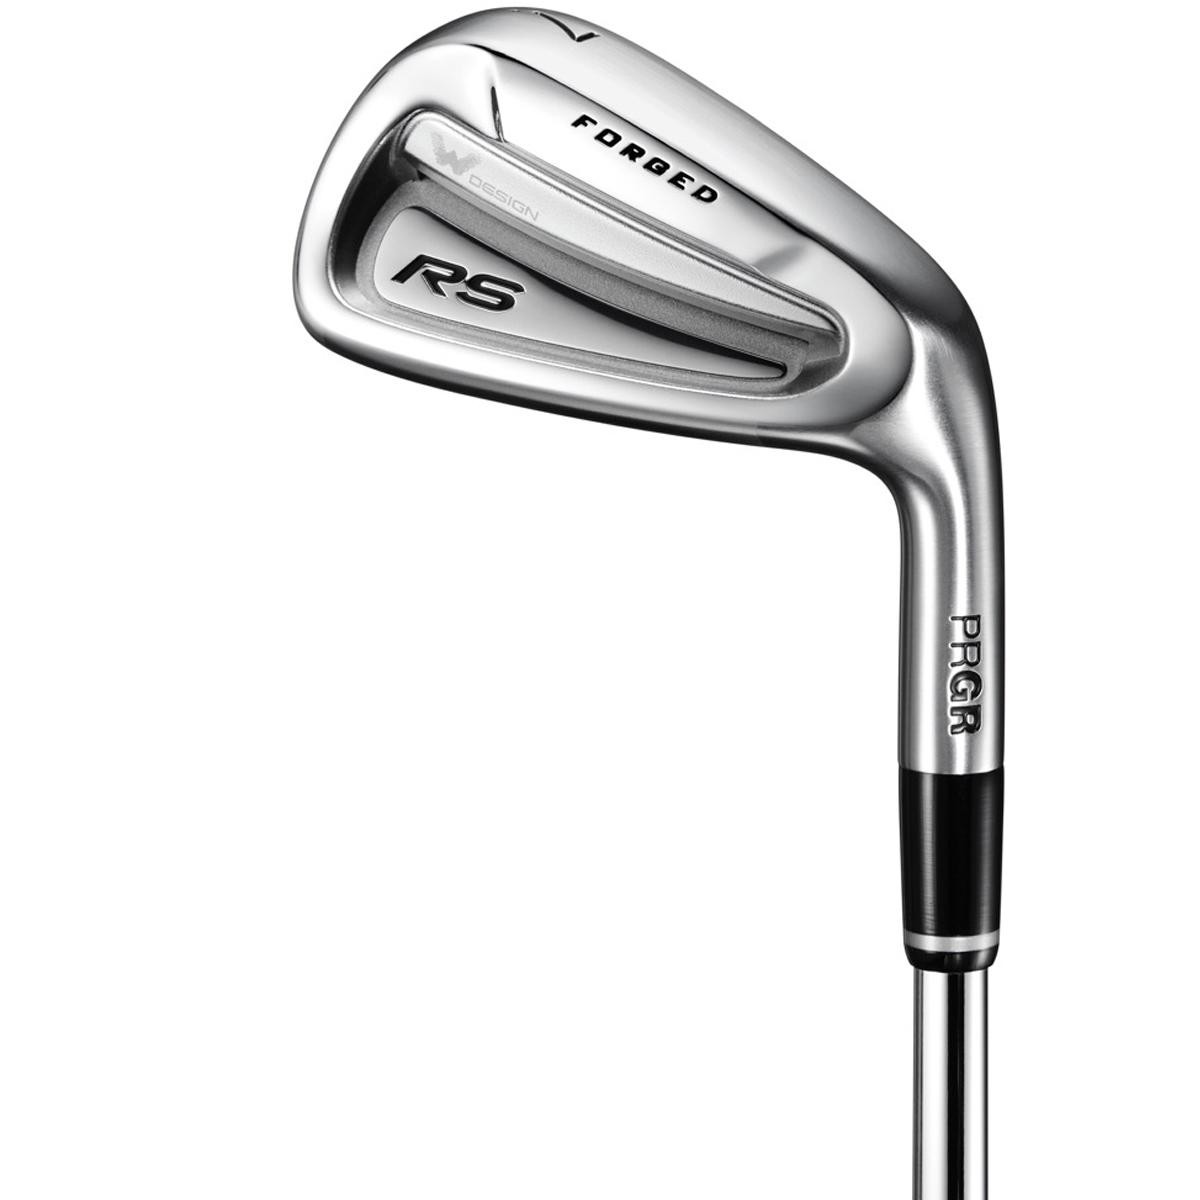  PRGR RS RS forged iron (6 pcs set ) N.S.PRO specifications steel III ver.2 shaft :N.S.PRO specifications steel III ver.2